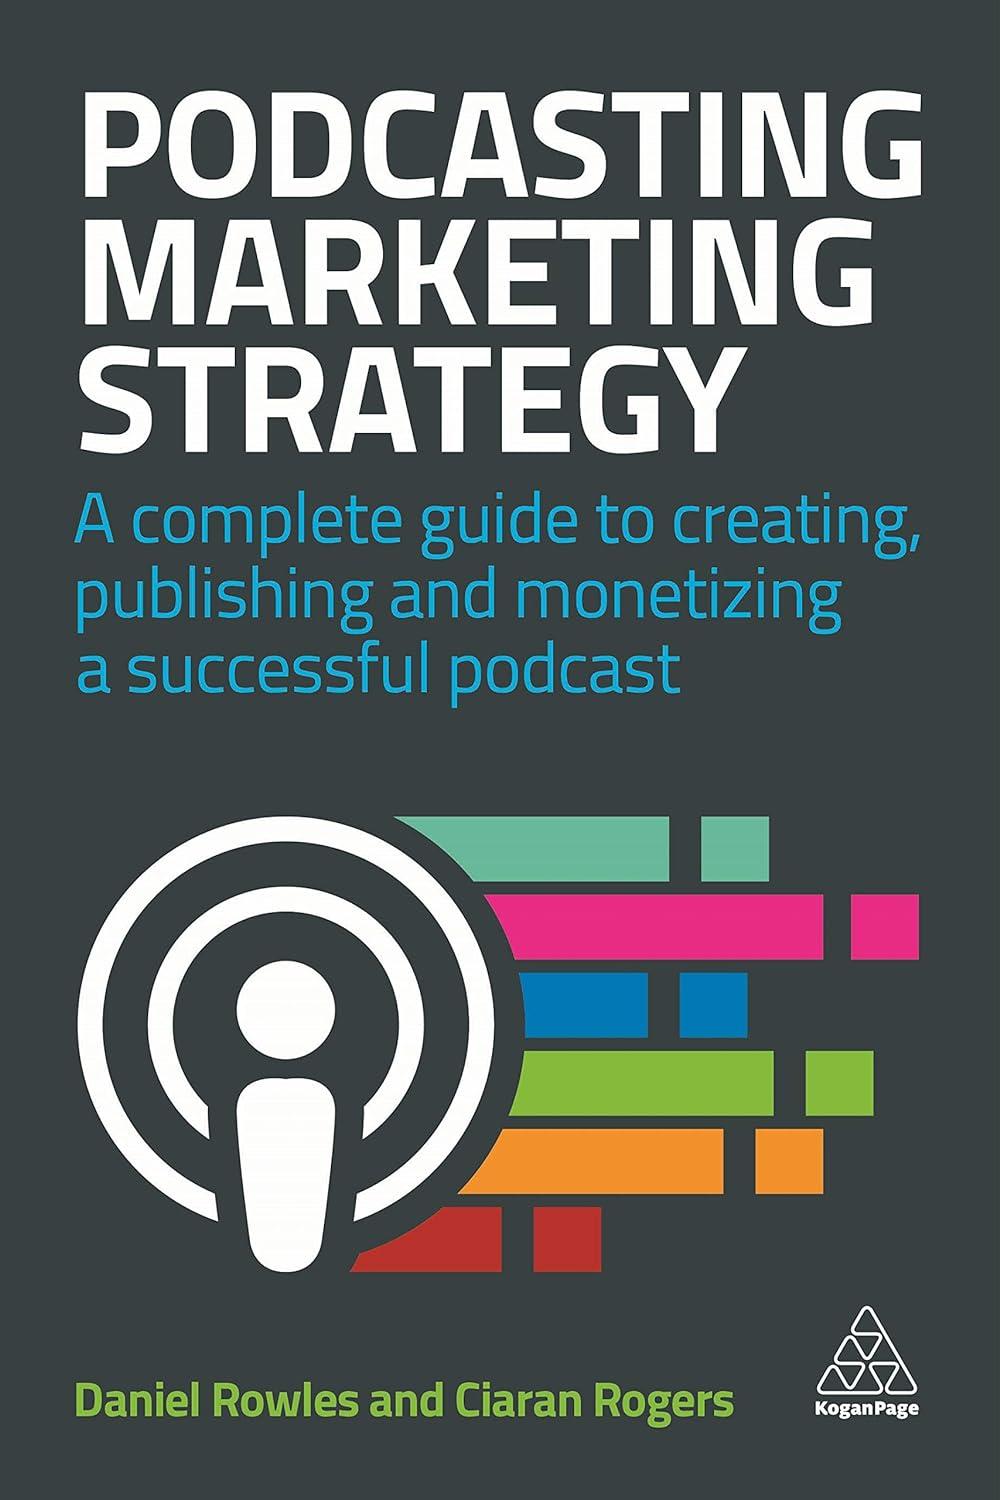 podcasting marketing strategy a complete guide to creating, publishing and monetizing a successful podcast